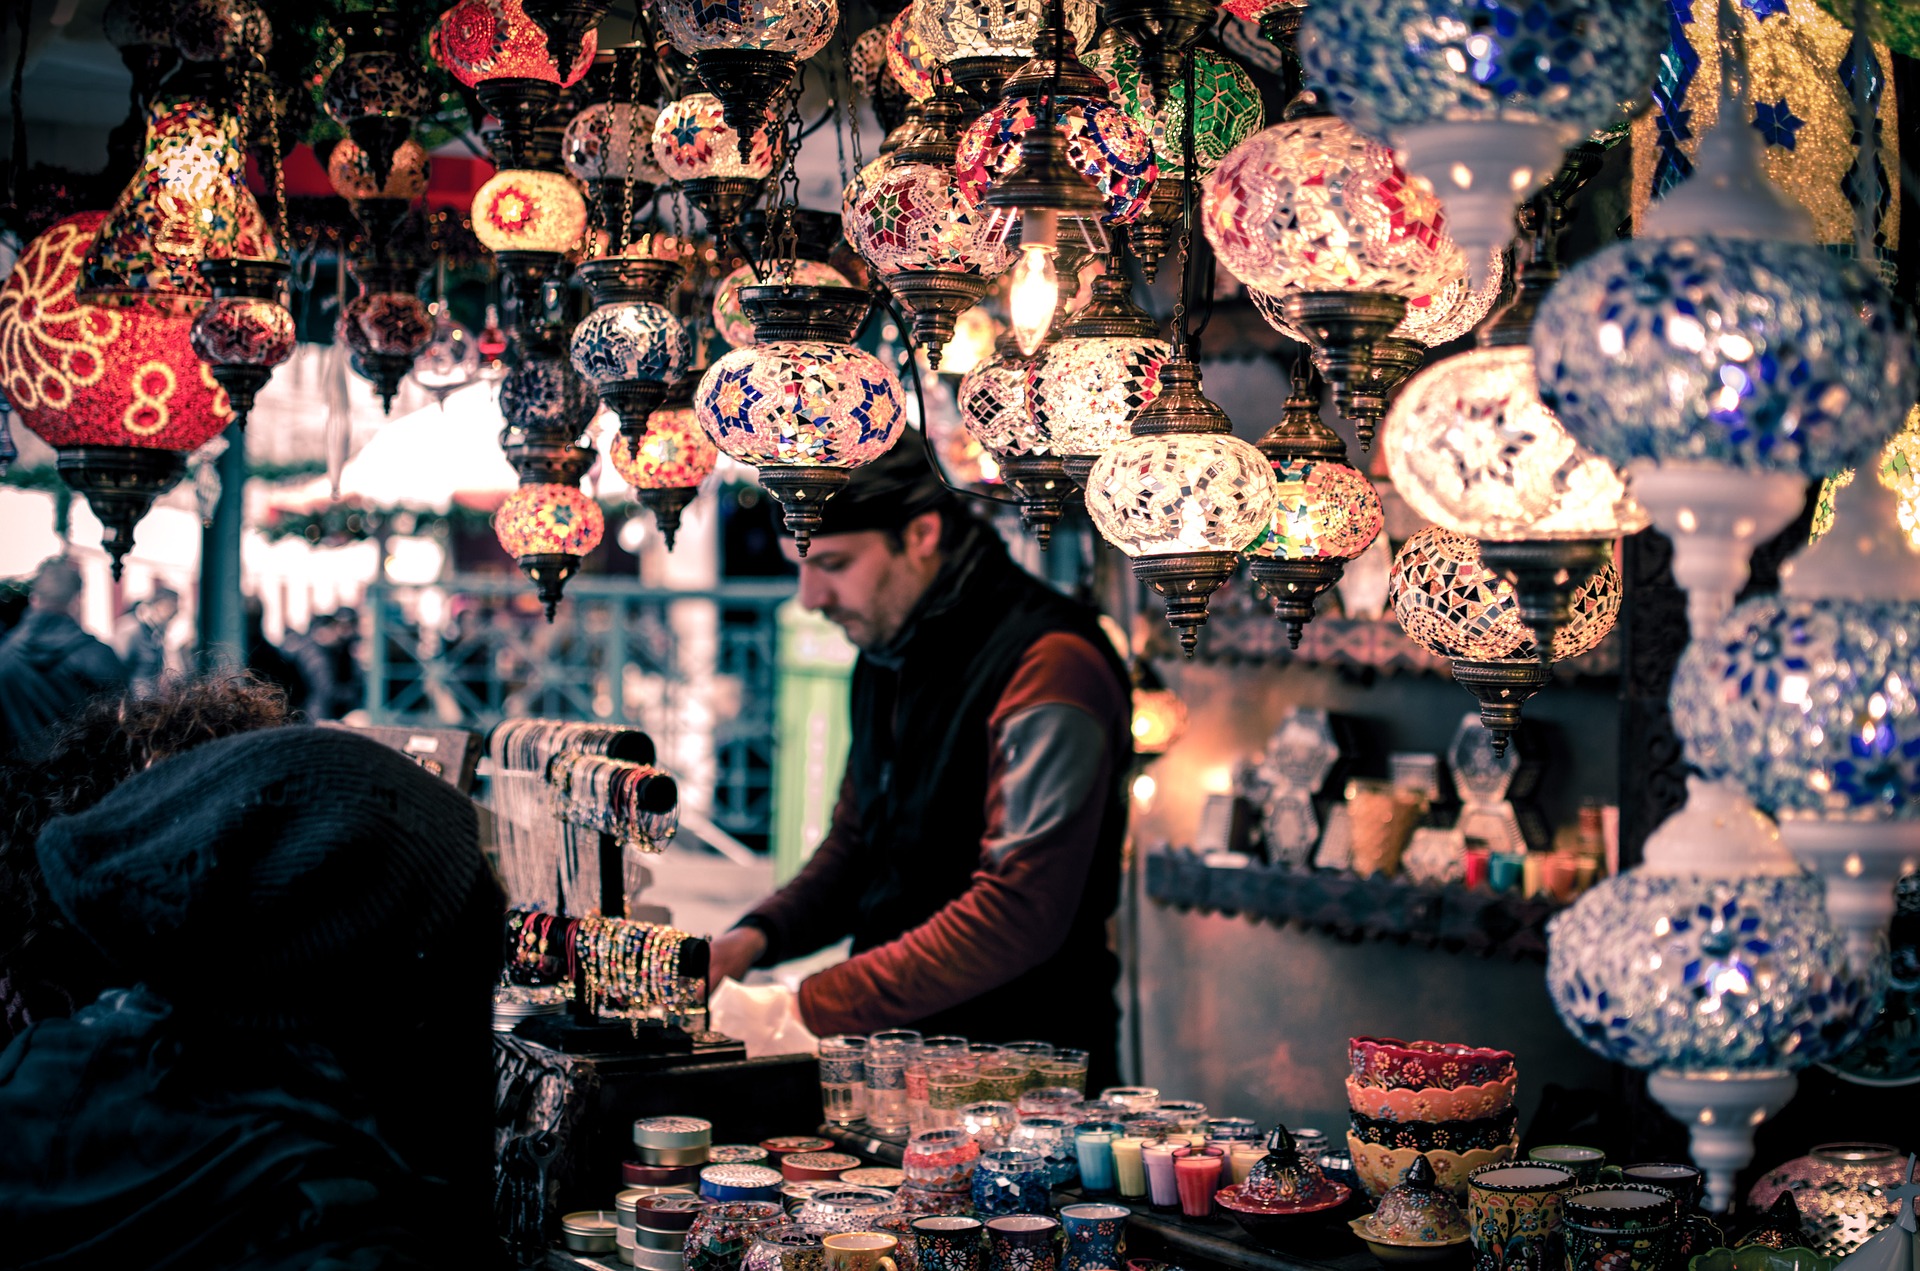 Shopping In Turkey: Top 10 Traditional Souvenirs To Buy Before You Leave